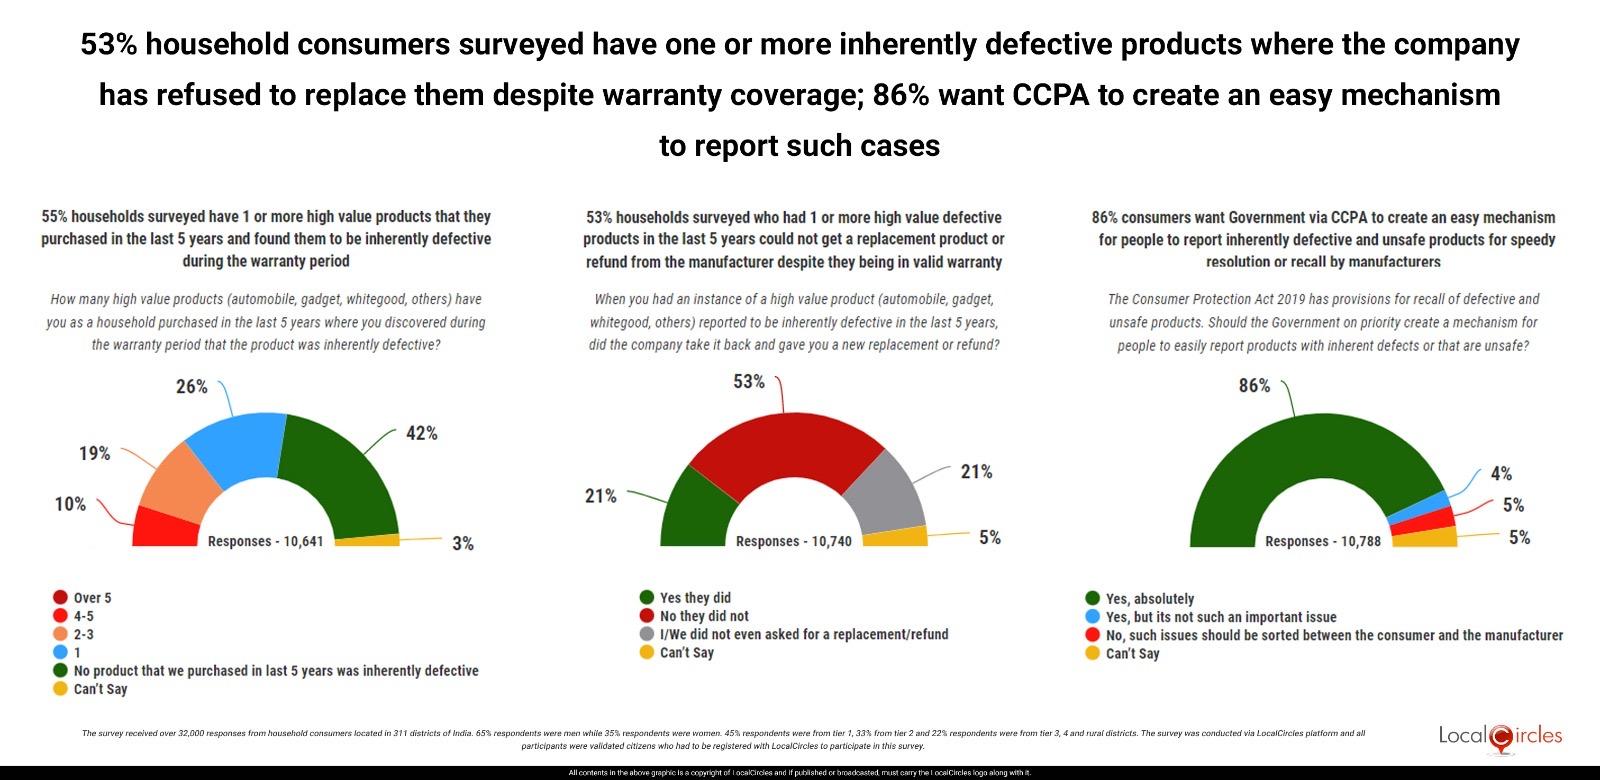 53% household consumers surveyed have one or more inherently defective products where the manufacturer has refused to replace/compensate despite being in warranty